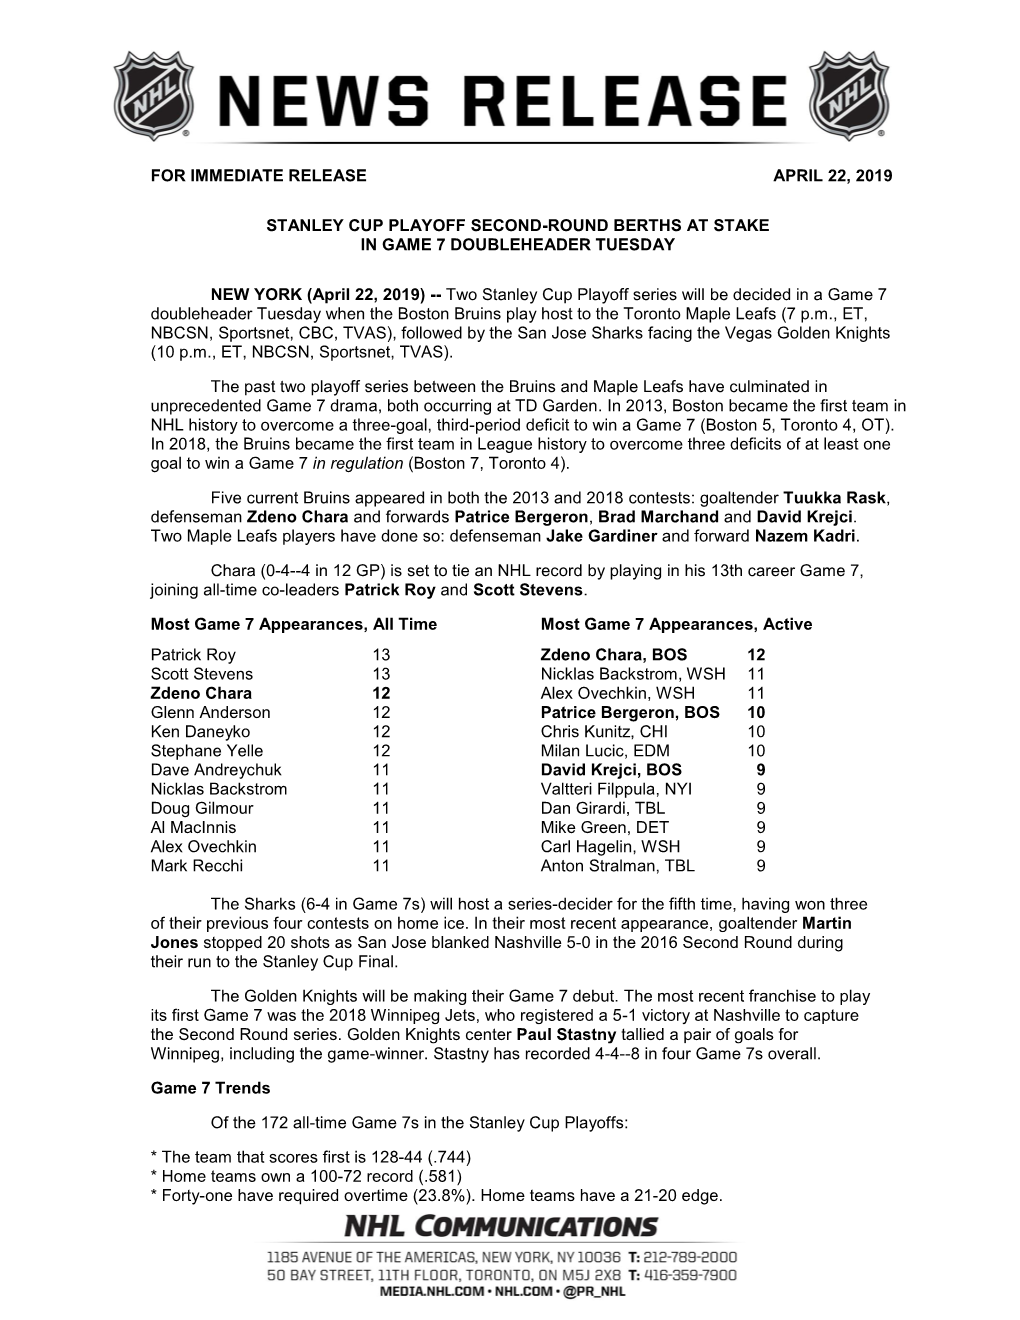 For Immediate Release April 22, 2019 Stanley Cup Playoff